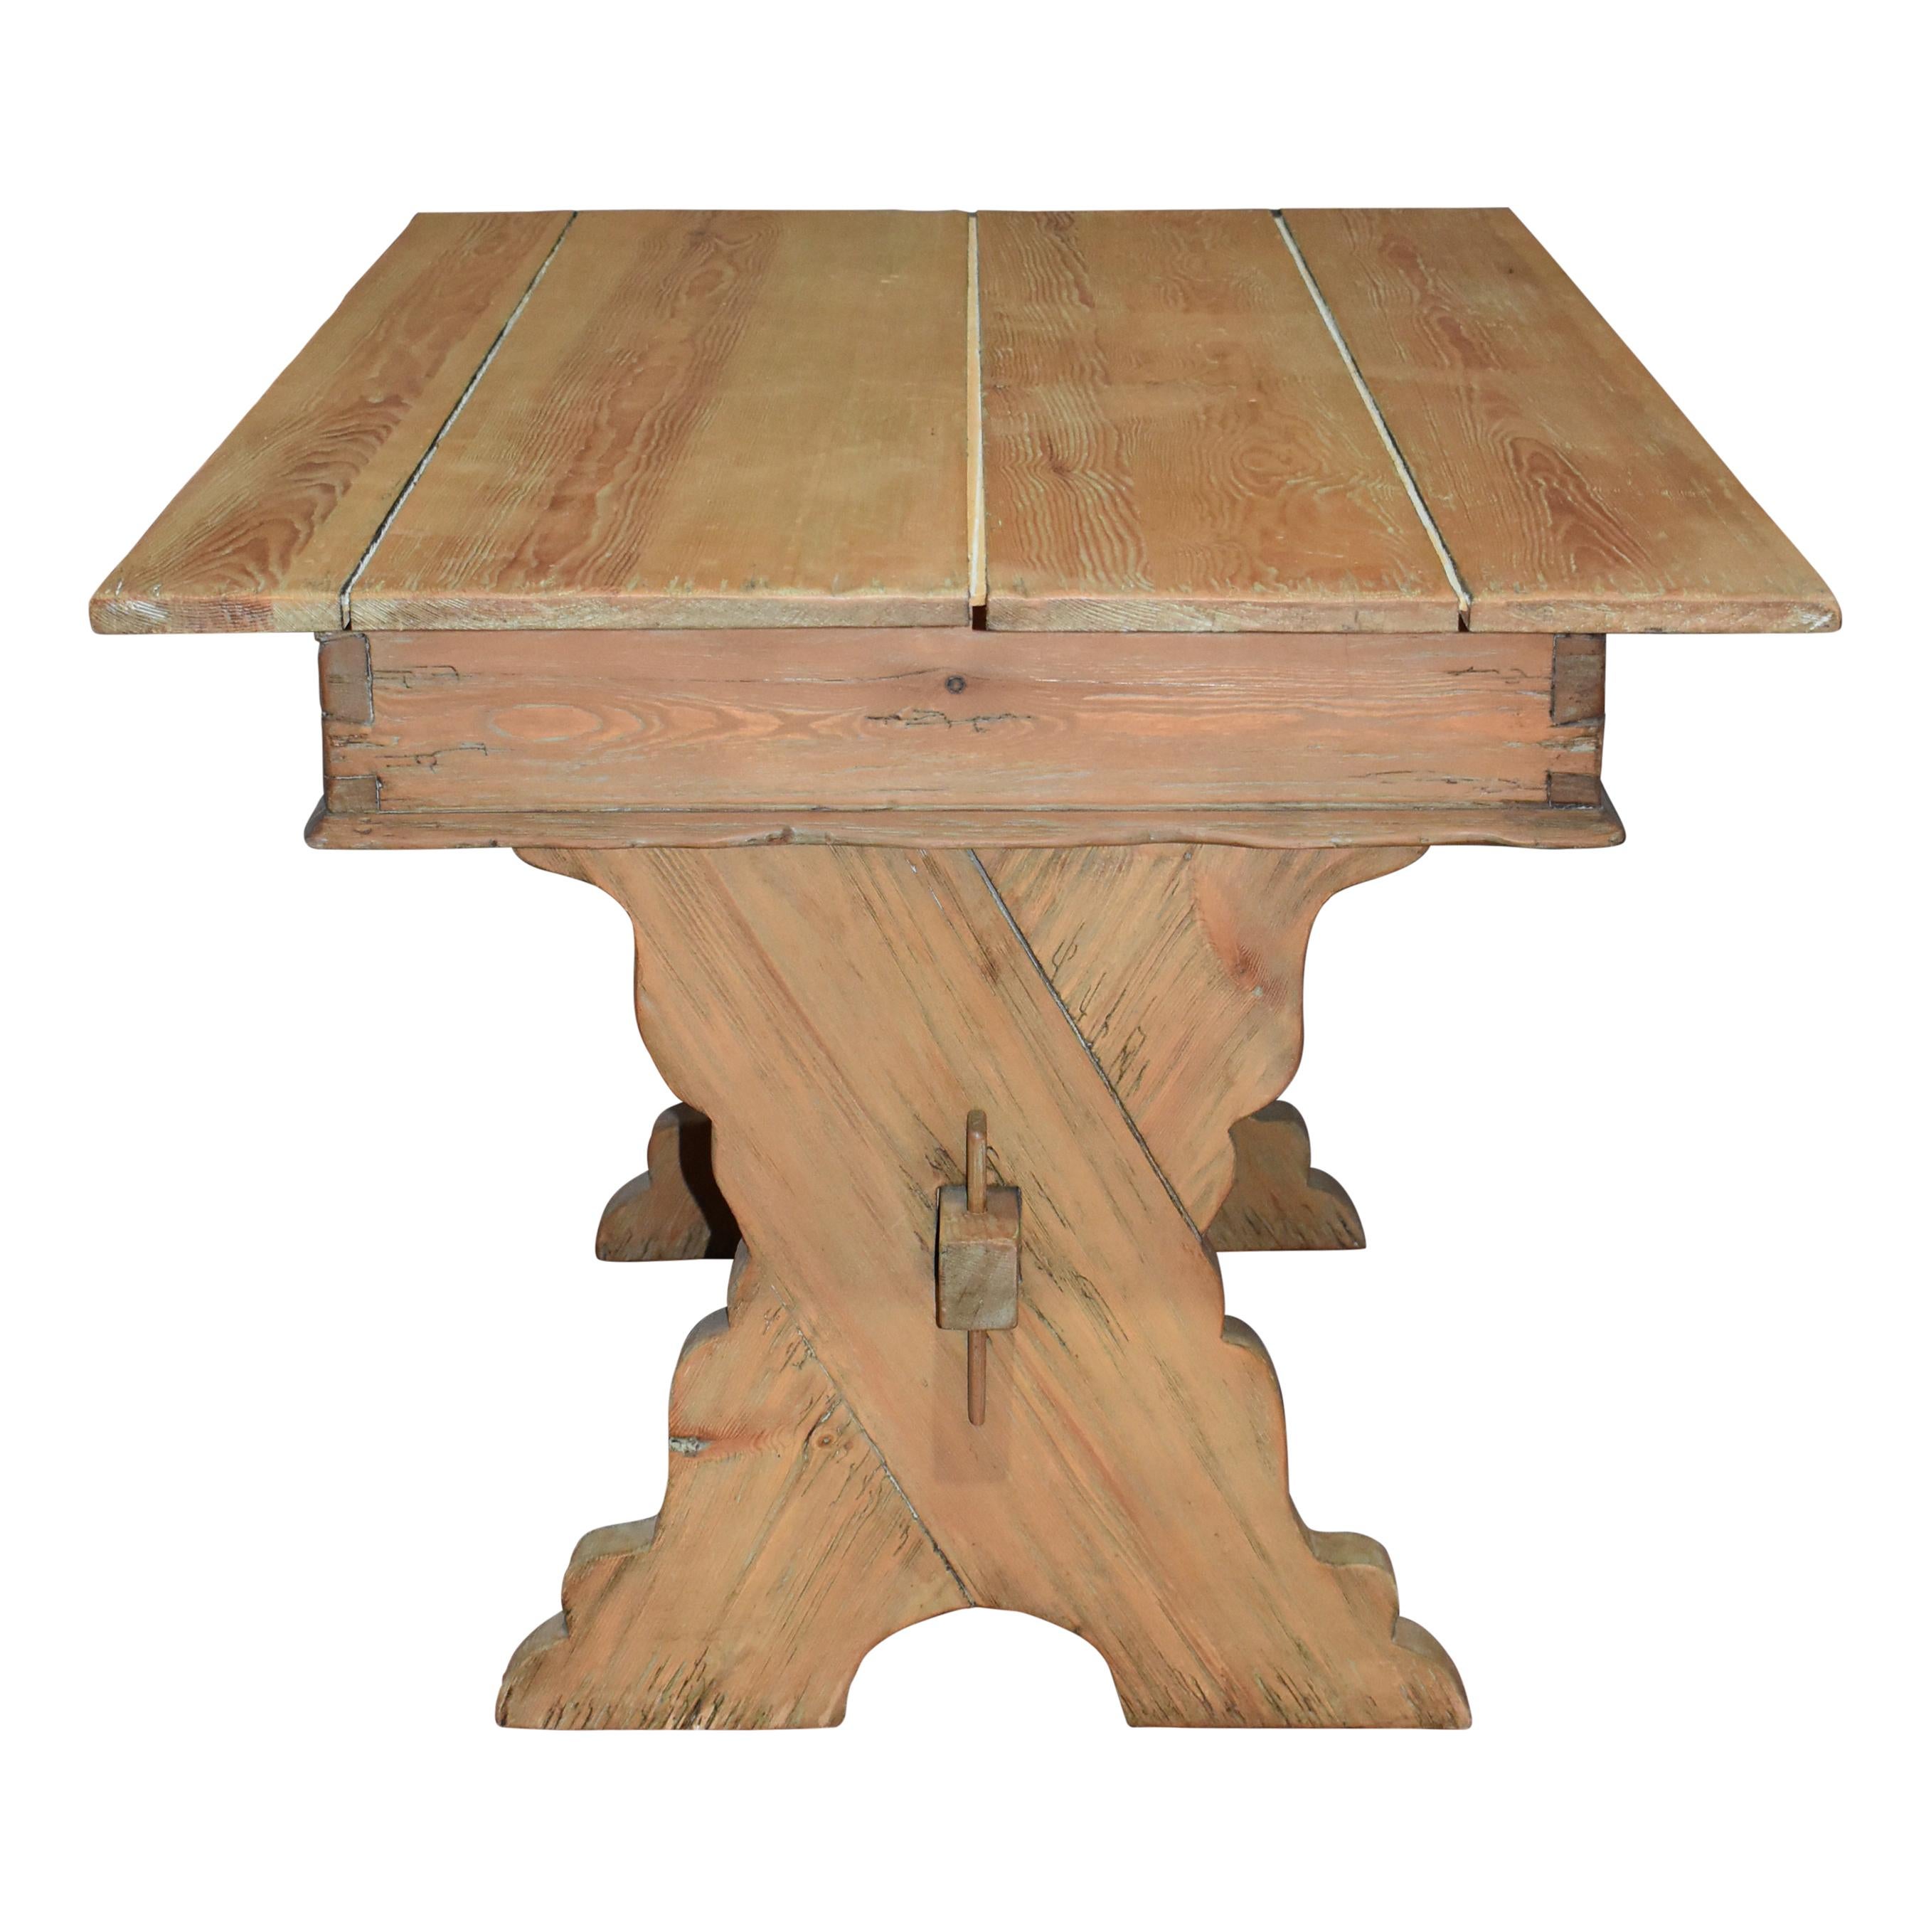 Comprised of solid pine, this reproduction of an 18th century, Italian counting table features a sawbuck design with X-shaped legs united by a keyed-Tenon stretcher. The table's planked top can be lifted to reveal a concealed compartment for storage.